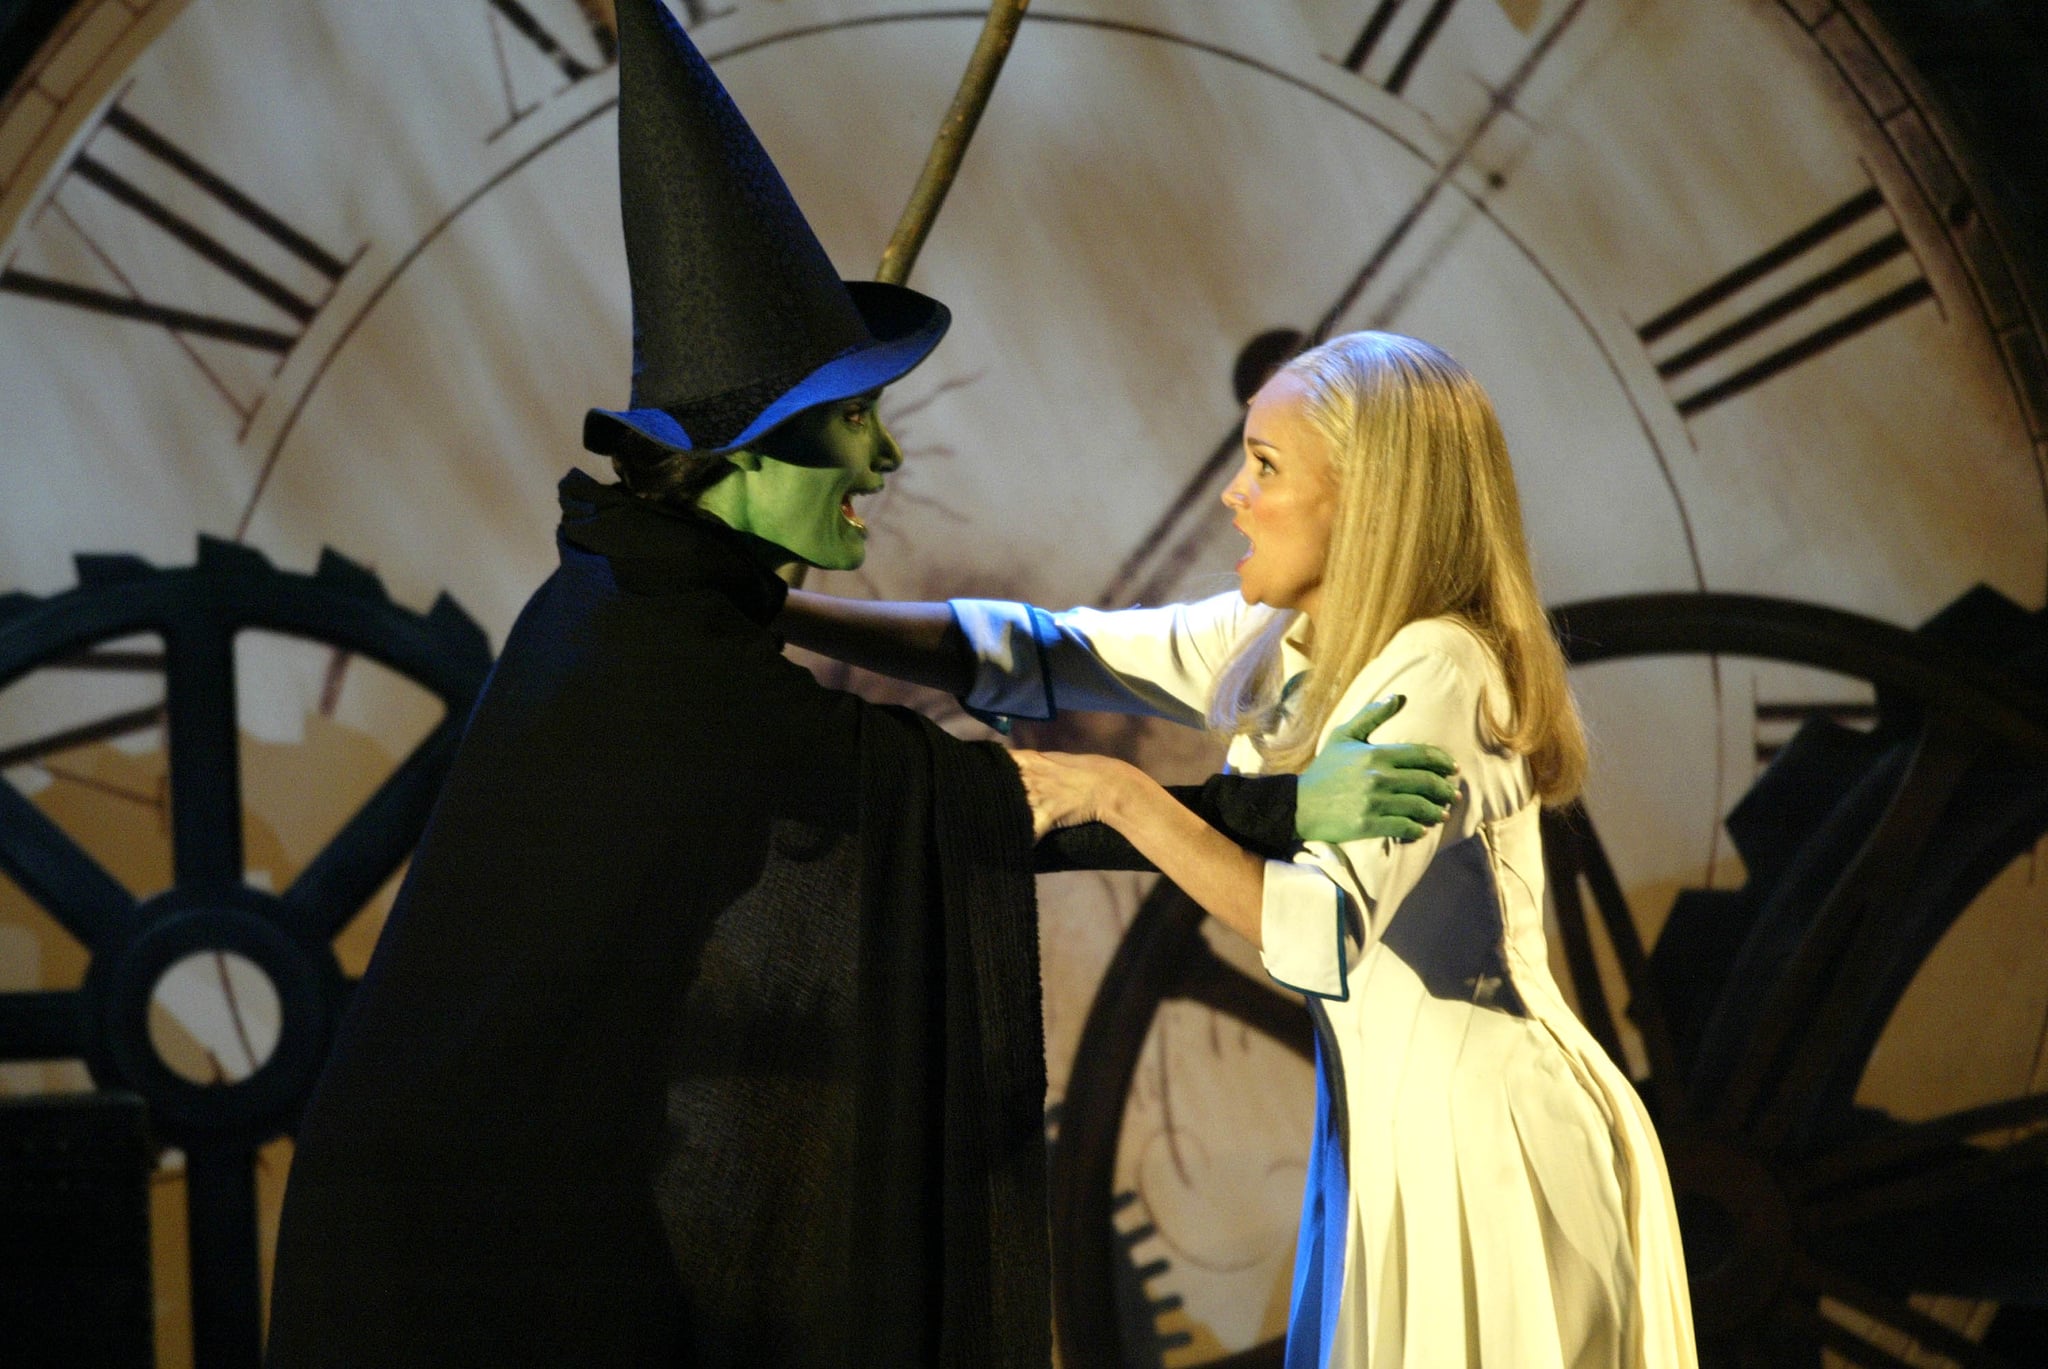 Idina Menzel and Kristin Chenoweth Are Coming Together For a Wicked Reunion...